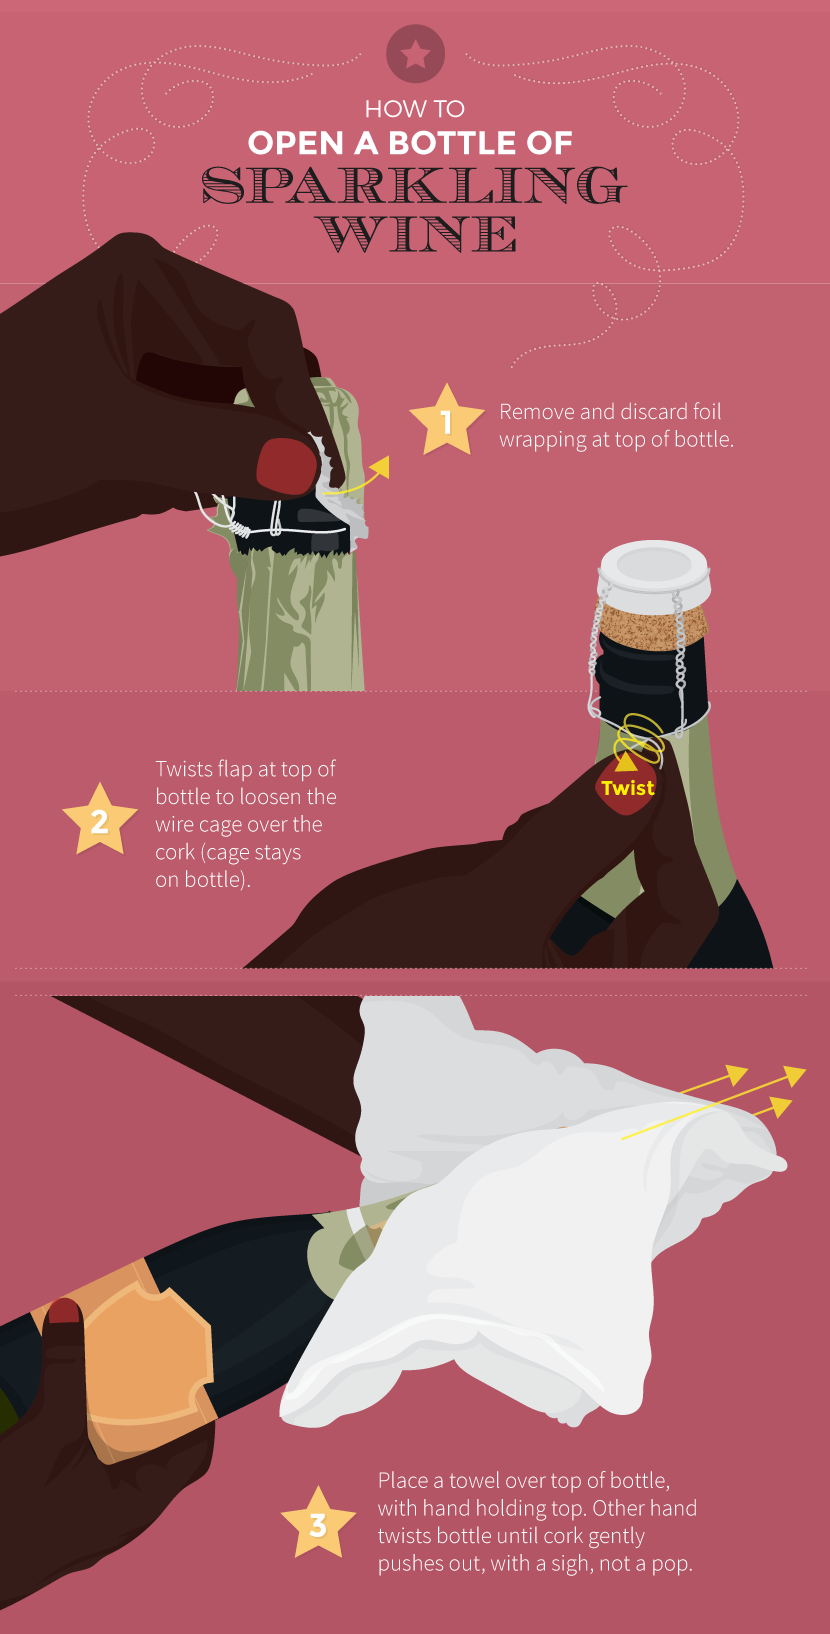 How to Open Sparkling Wine - How to Properly Chill and Open Sparkling Wine